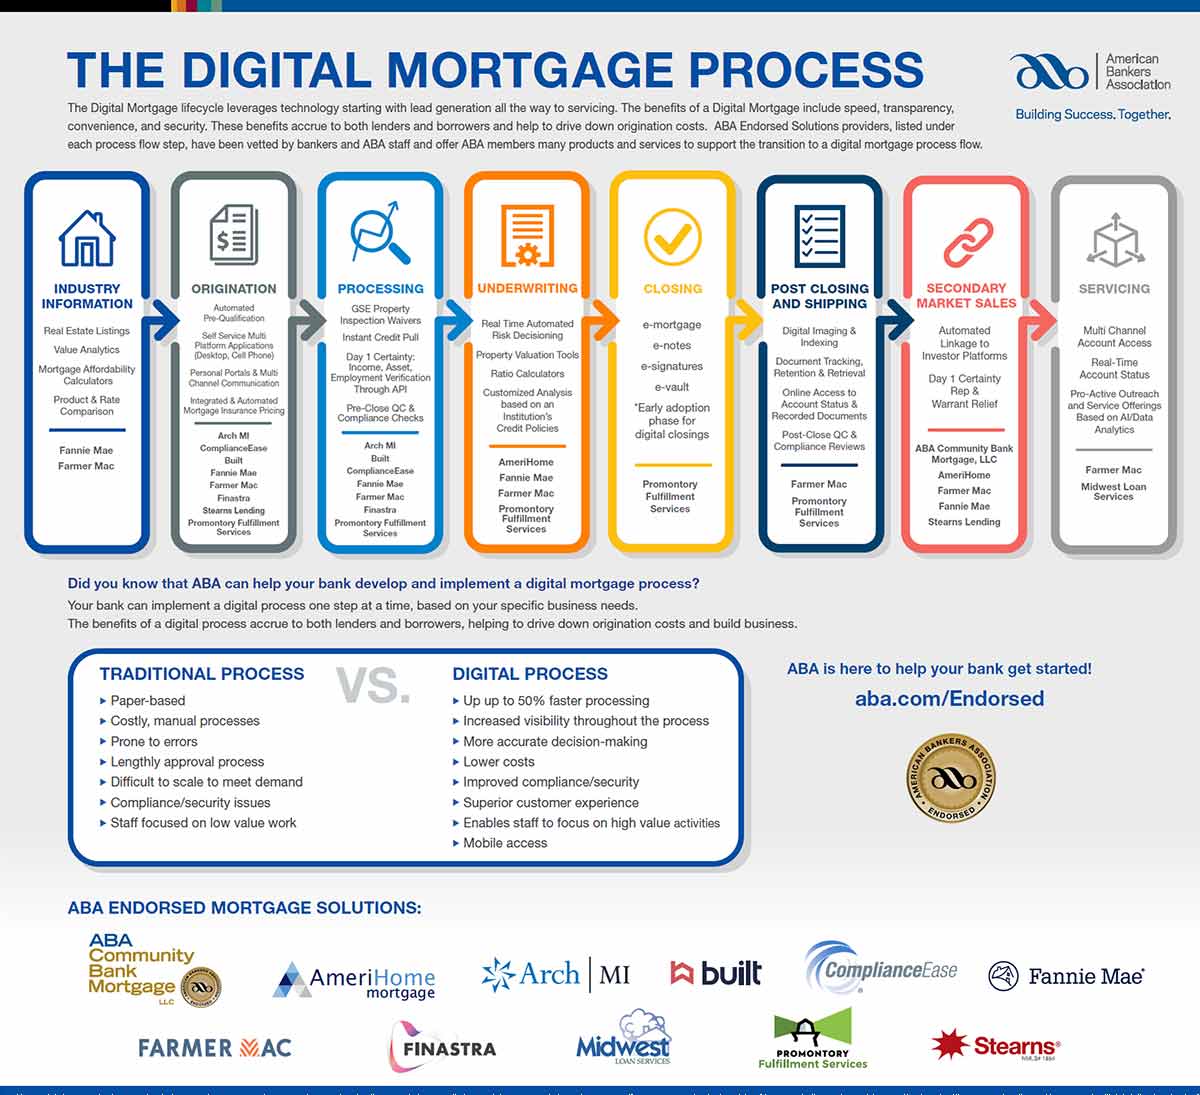 Infographic depicting the digital mortgage process.